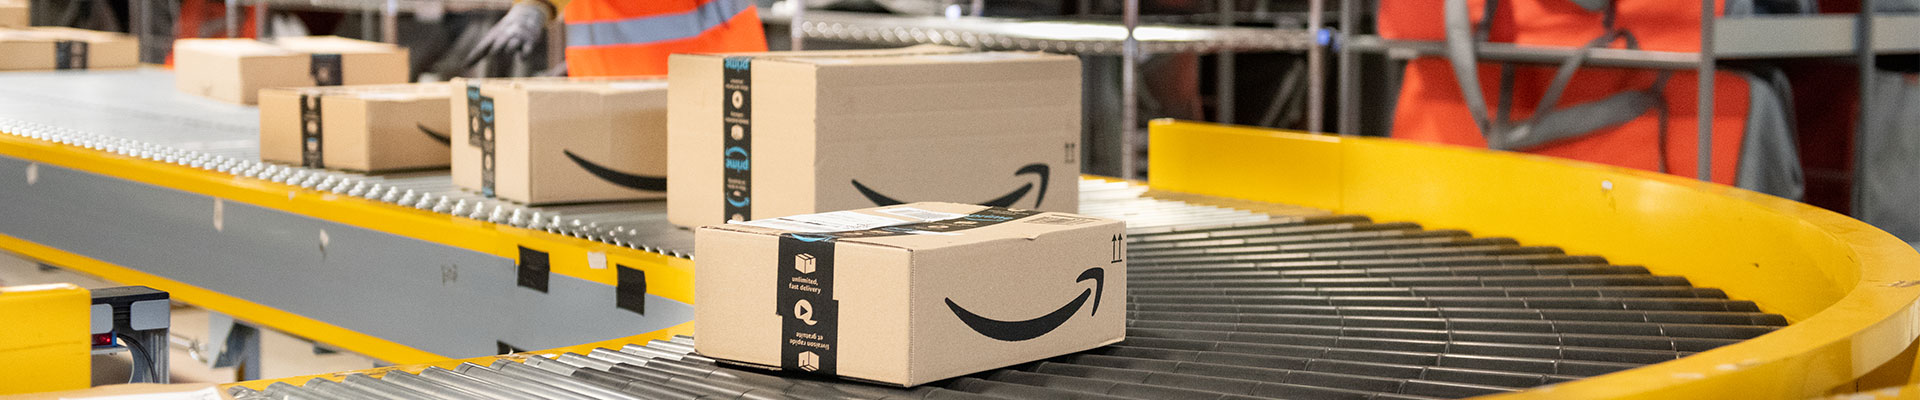 Amazon worker successfully fulfills an order of in-stock items, which is one of the many Amazon Vendor Central obstacles a brand must consider.